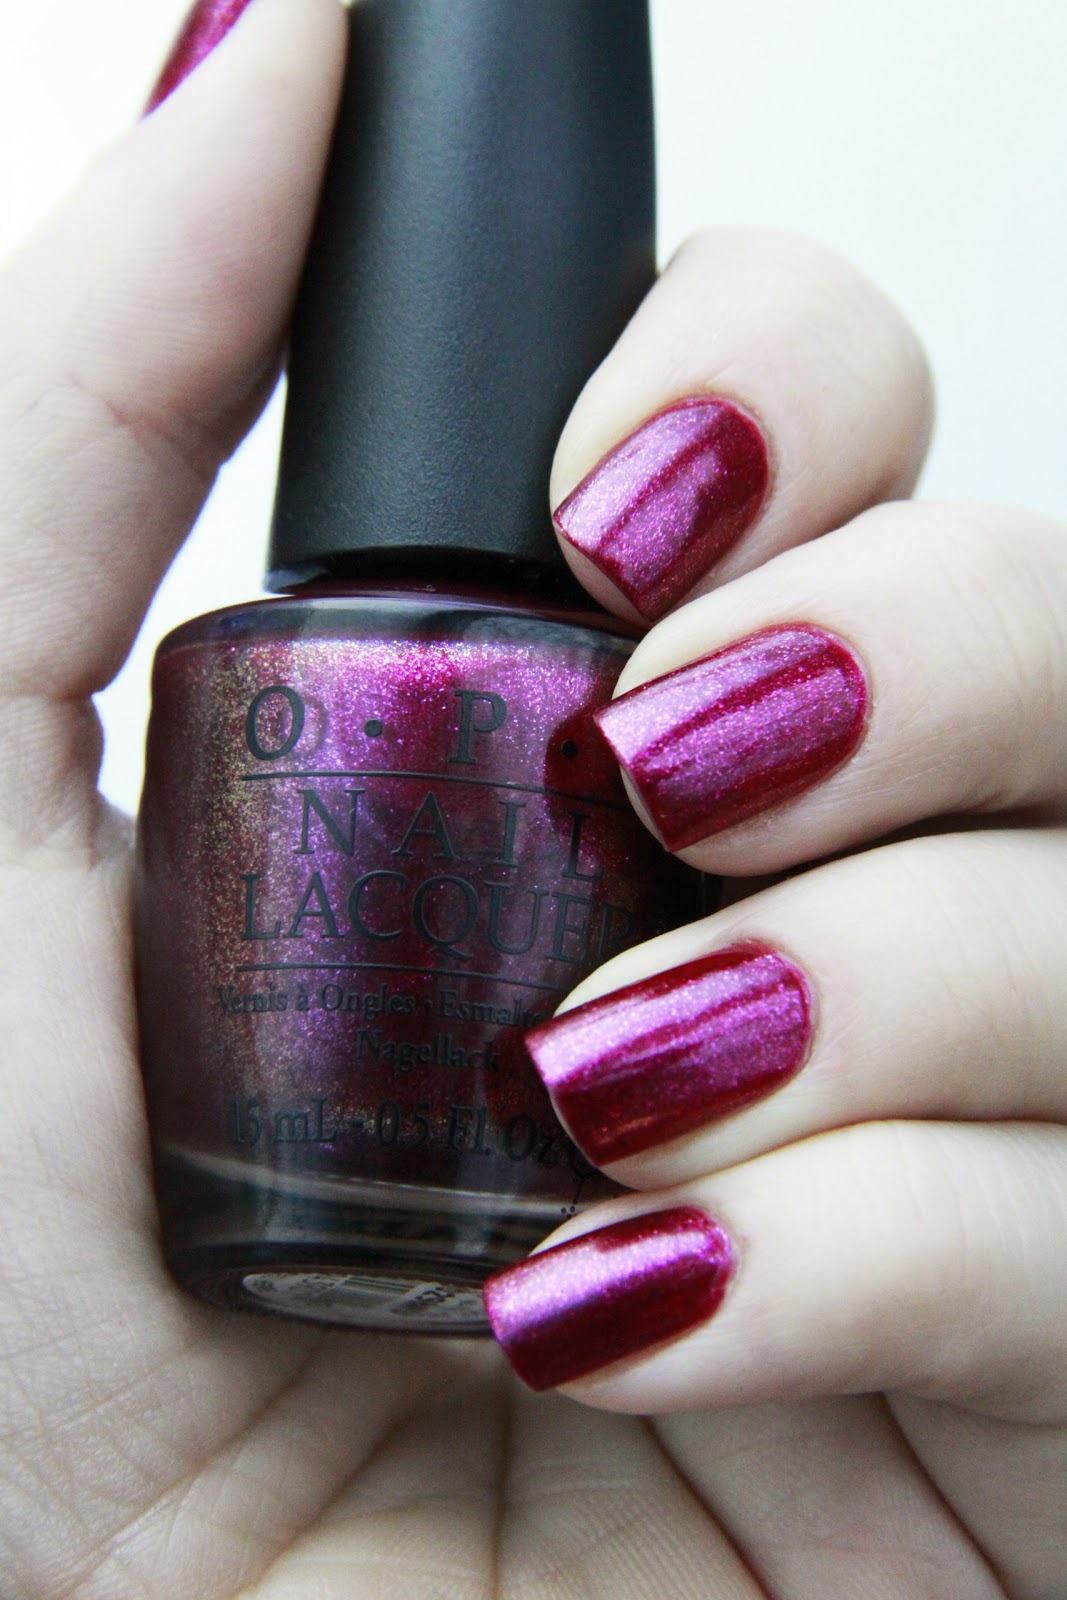 Nails by Catharina: OPI The one that got away